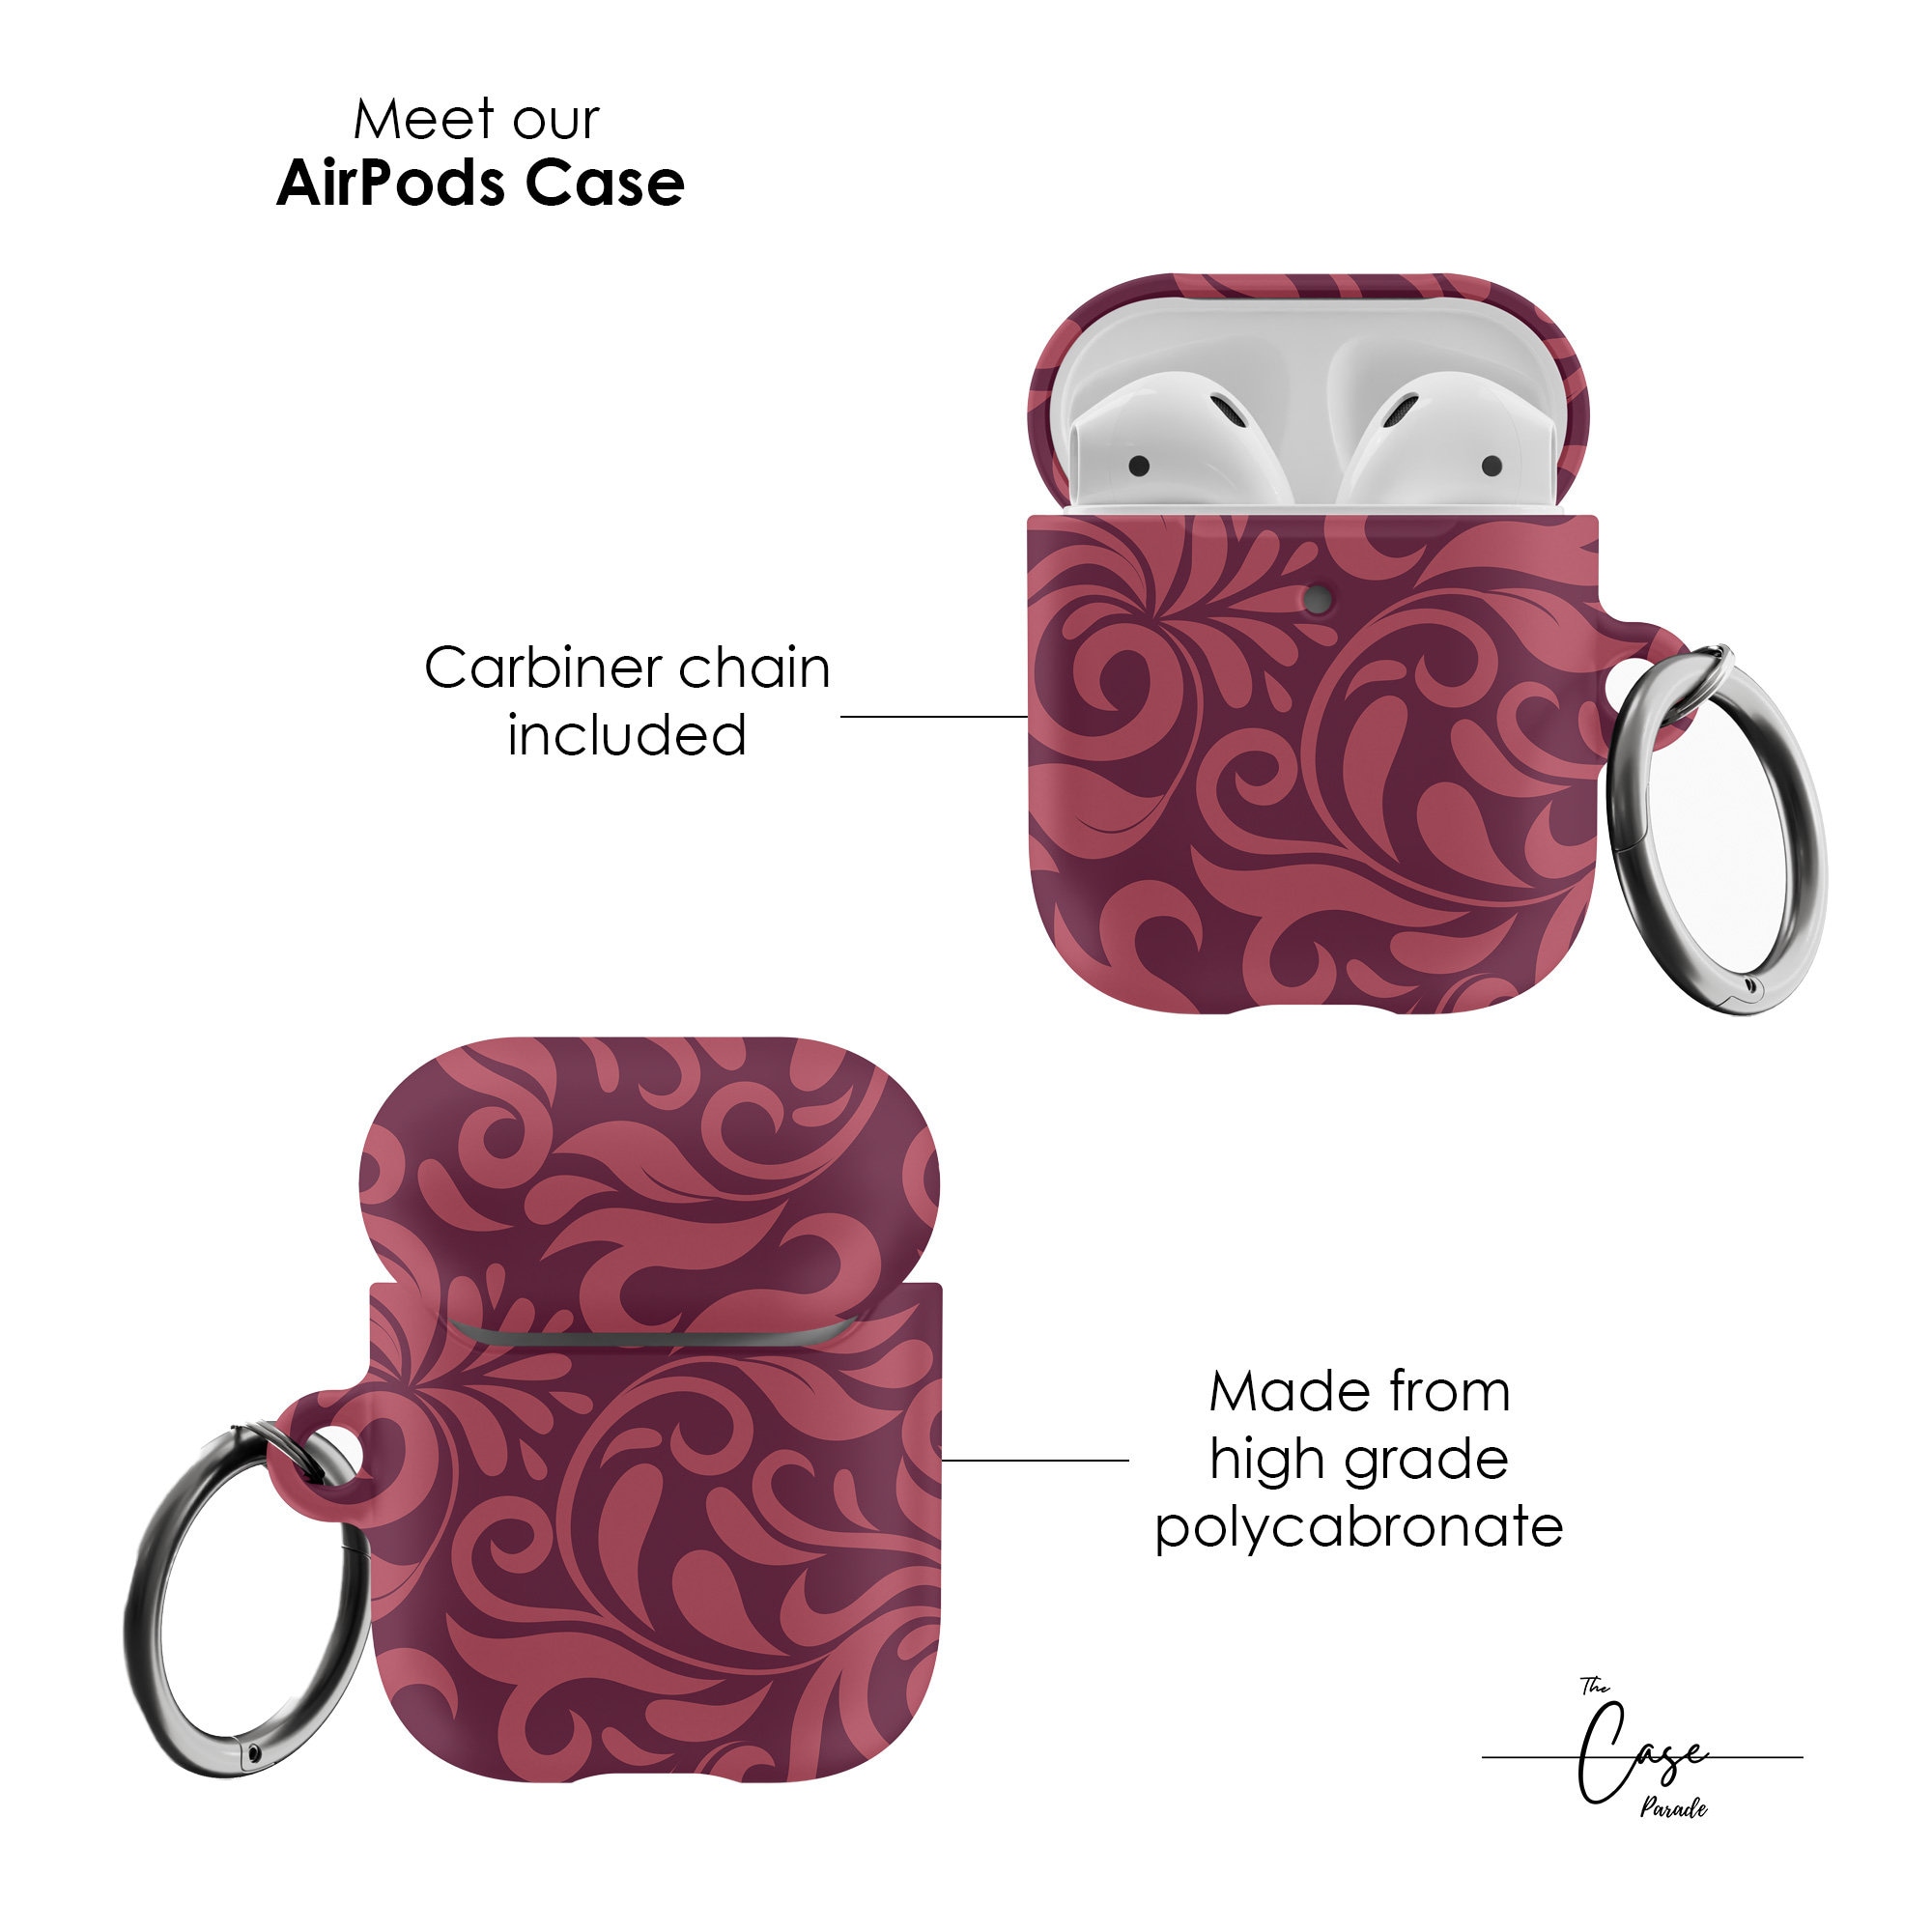 Luxury designer Case Case For AirPods 1 2 Pro Luxury Necklace Lanyard PU  Leather Wireless Bluetooth Earphone Protection Cover 